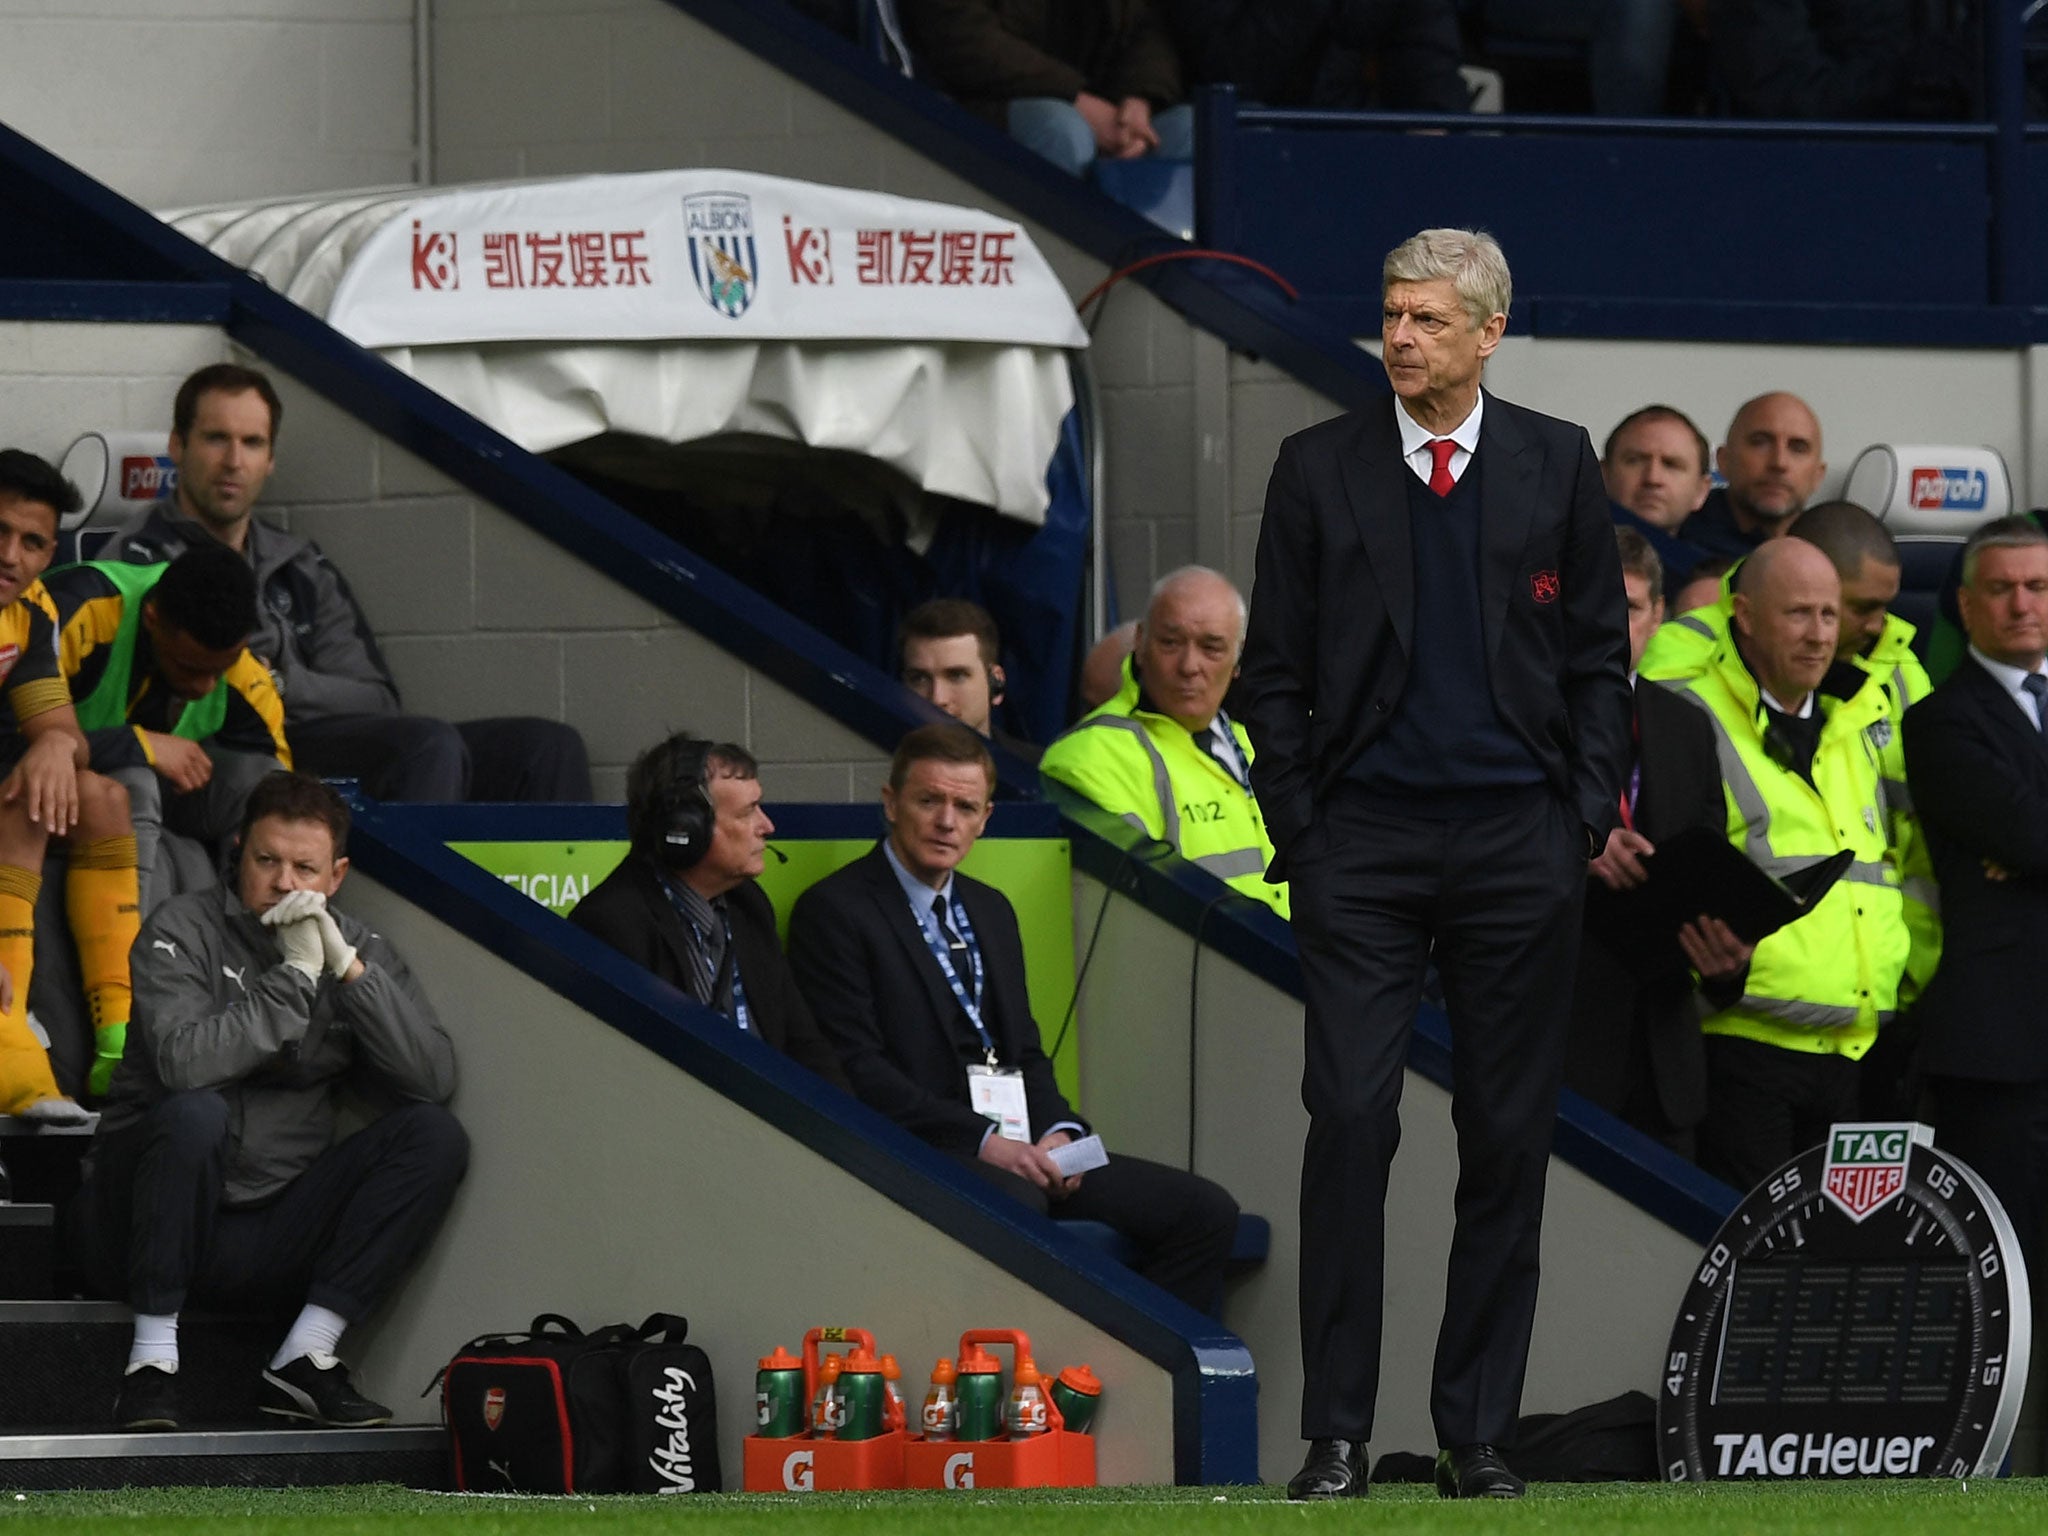 Arsene Wenger has been told to accept he is putting Arsenal in decline by Chris Sutton